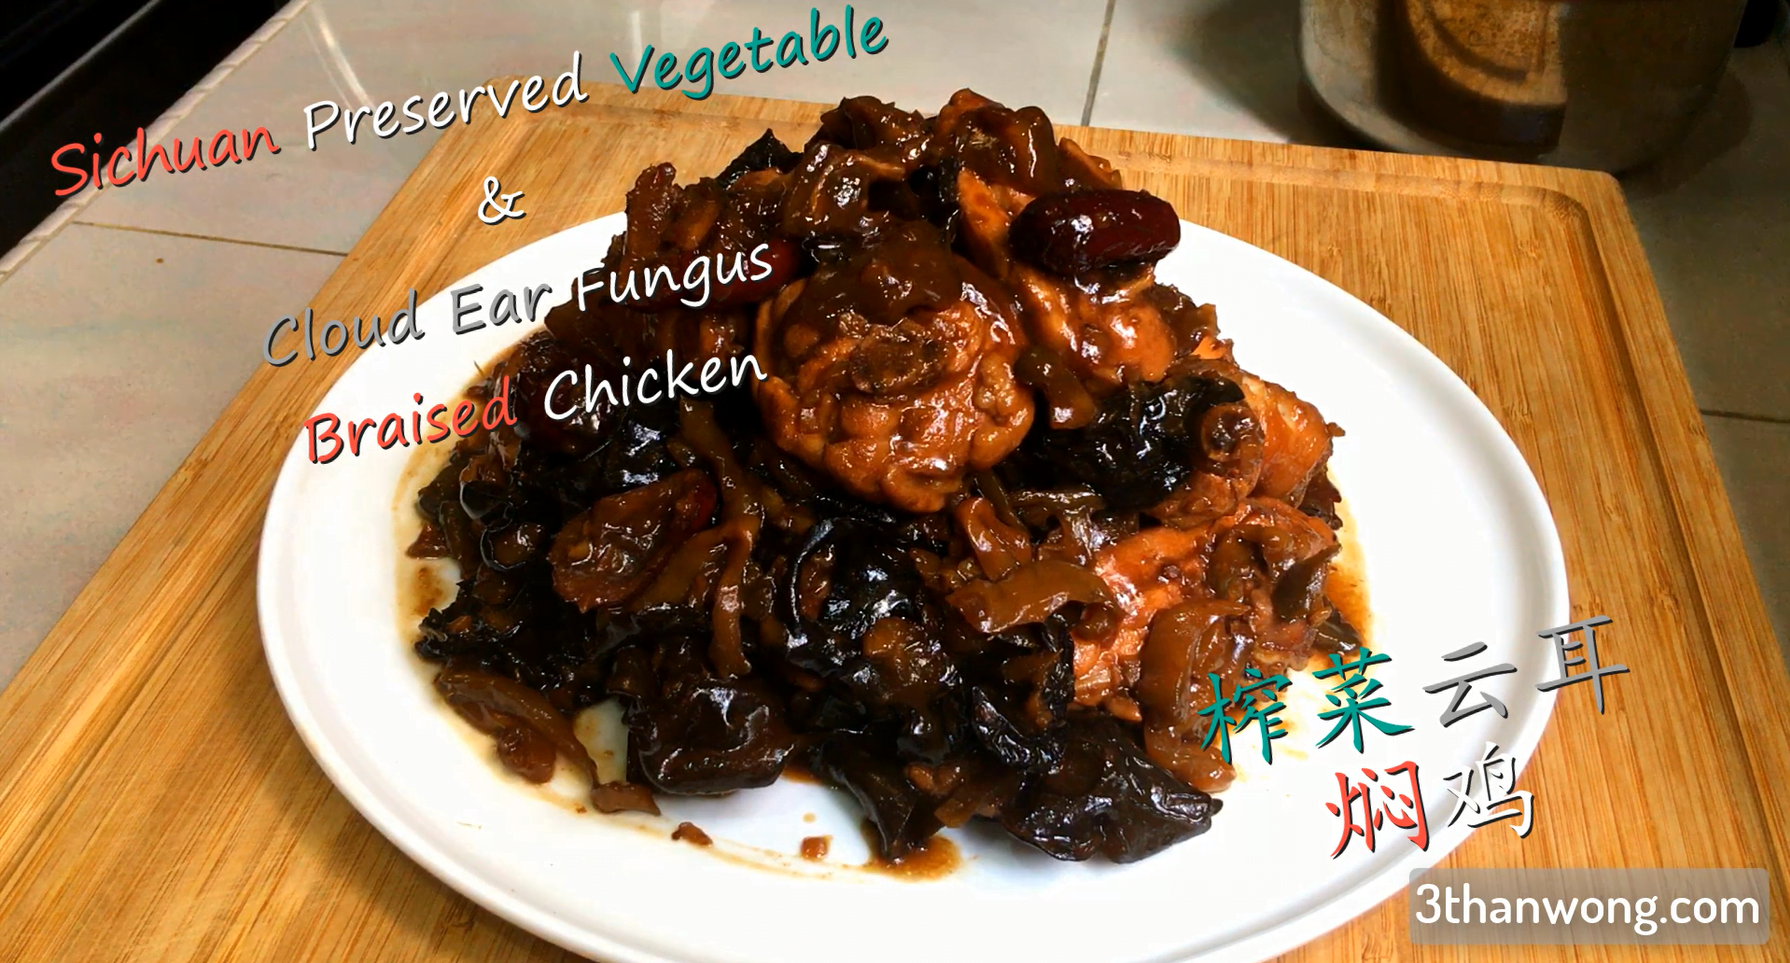 chinese chicken recipe with sichuan preserved vegetable & cloud ear fungus